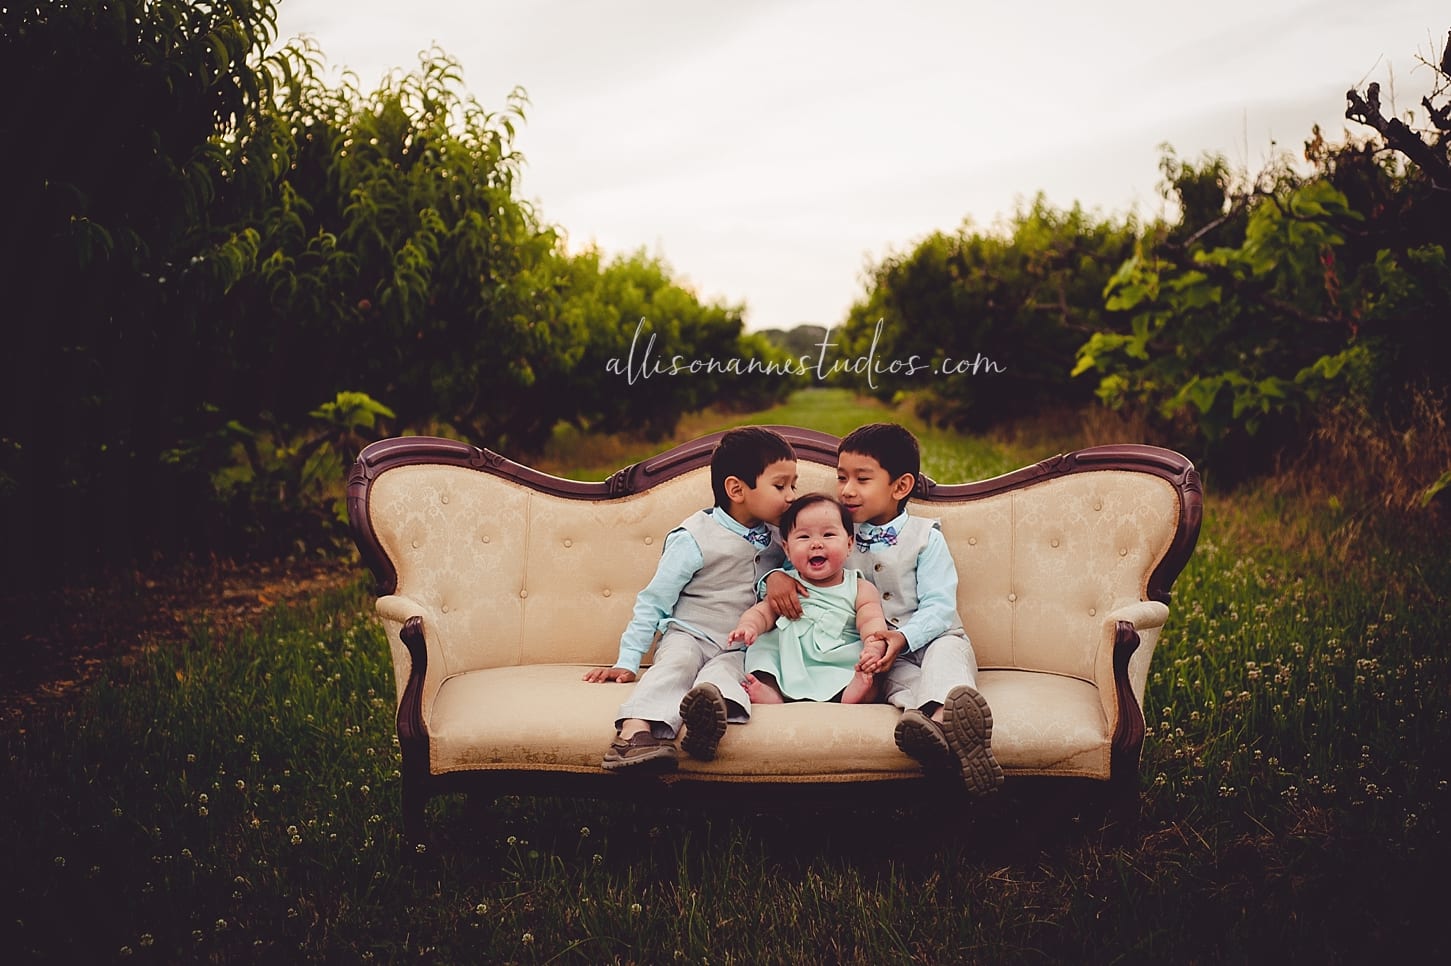 Allison Gallagher, Love, Hammonton, AllisonAnne Studios, Asian Family, best family photography in New Jersey, Janie & Jack, big brothers, peach orchards, Darla, best photographer in south jersey